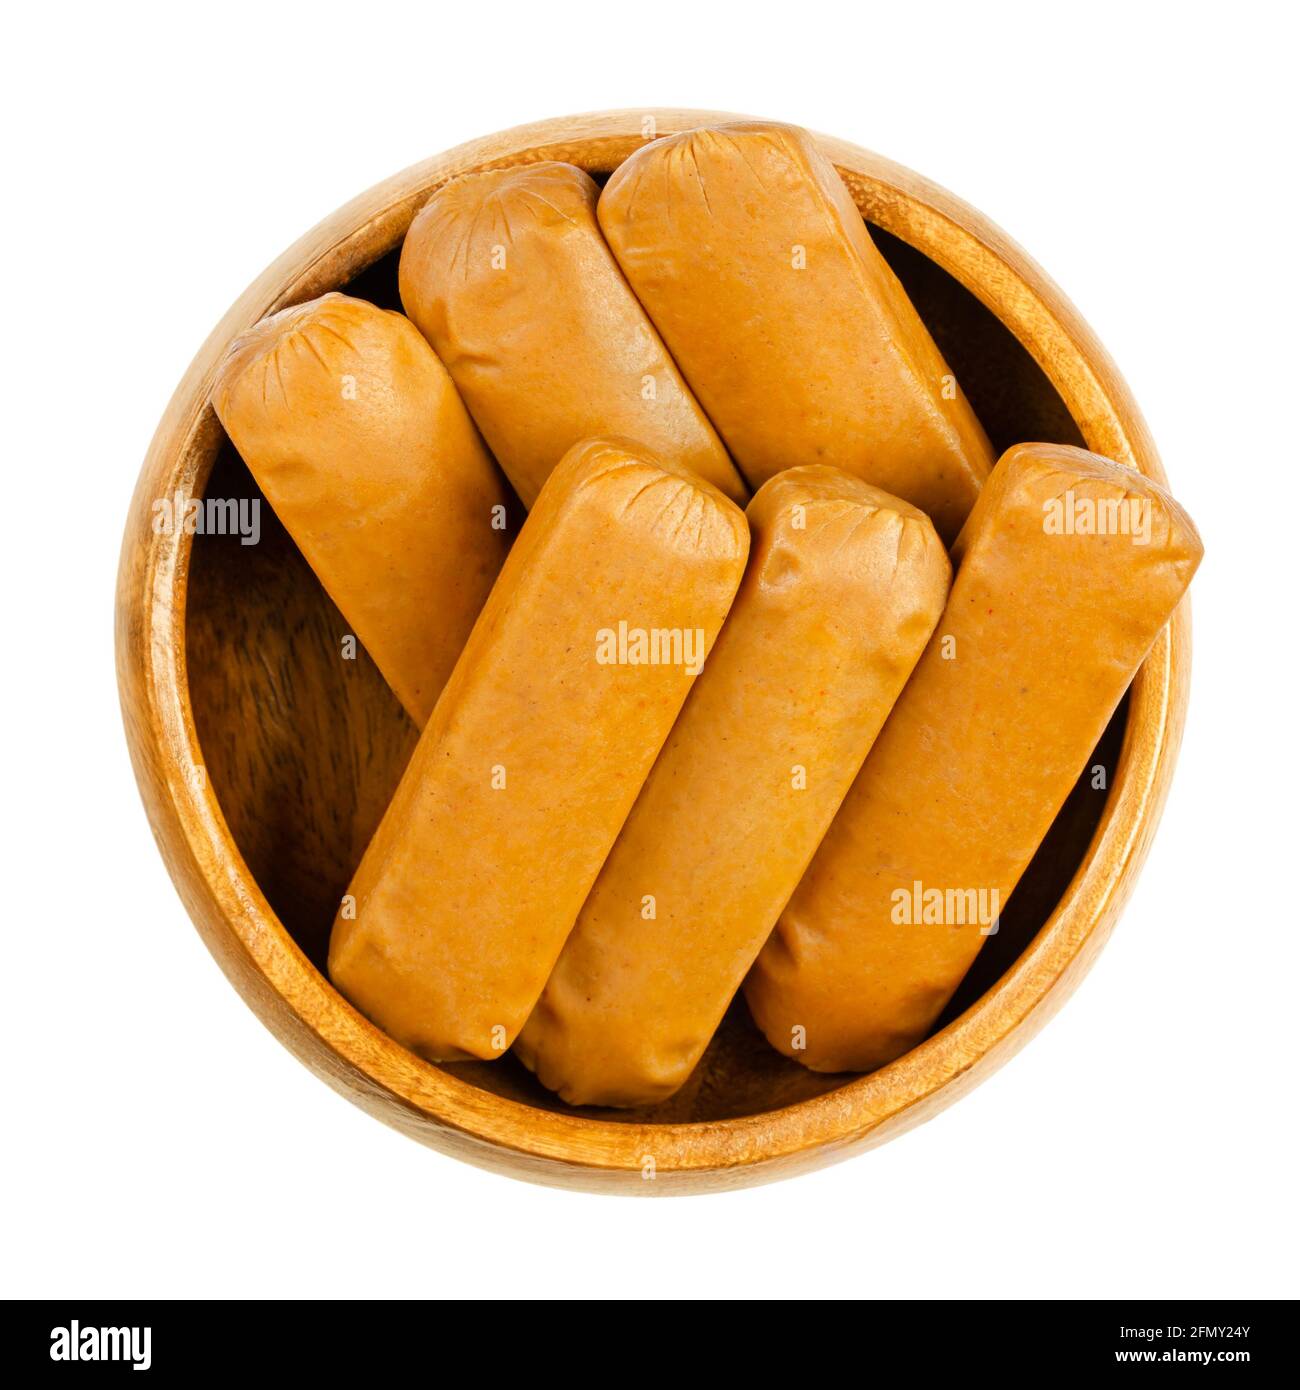 Vegan mini weenies, in a wooden bowl. Six small smoked sausages, made of saitan, a wheat gluten. Also called Wiener or Frankfurter Wuerstl. Close-up. Stock Photo